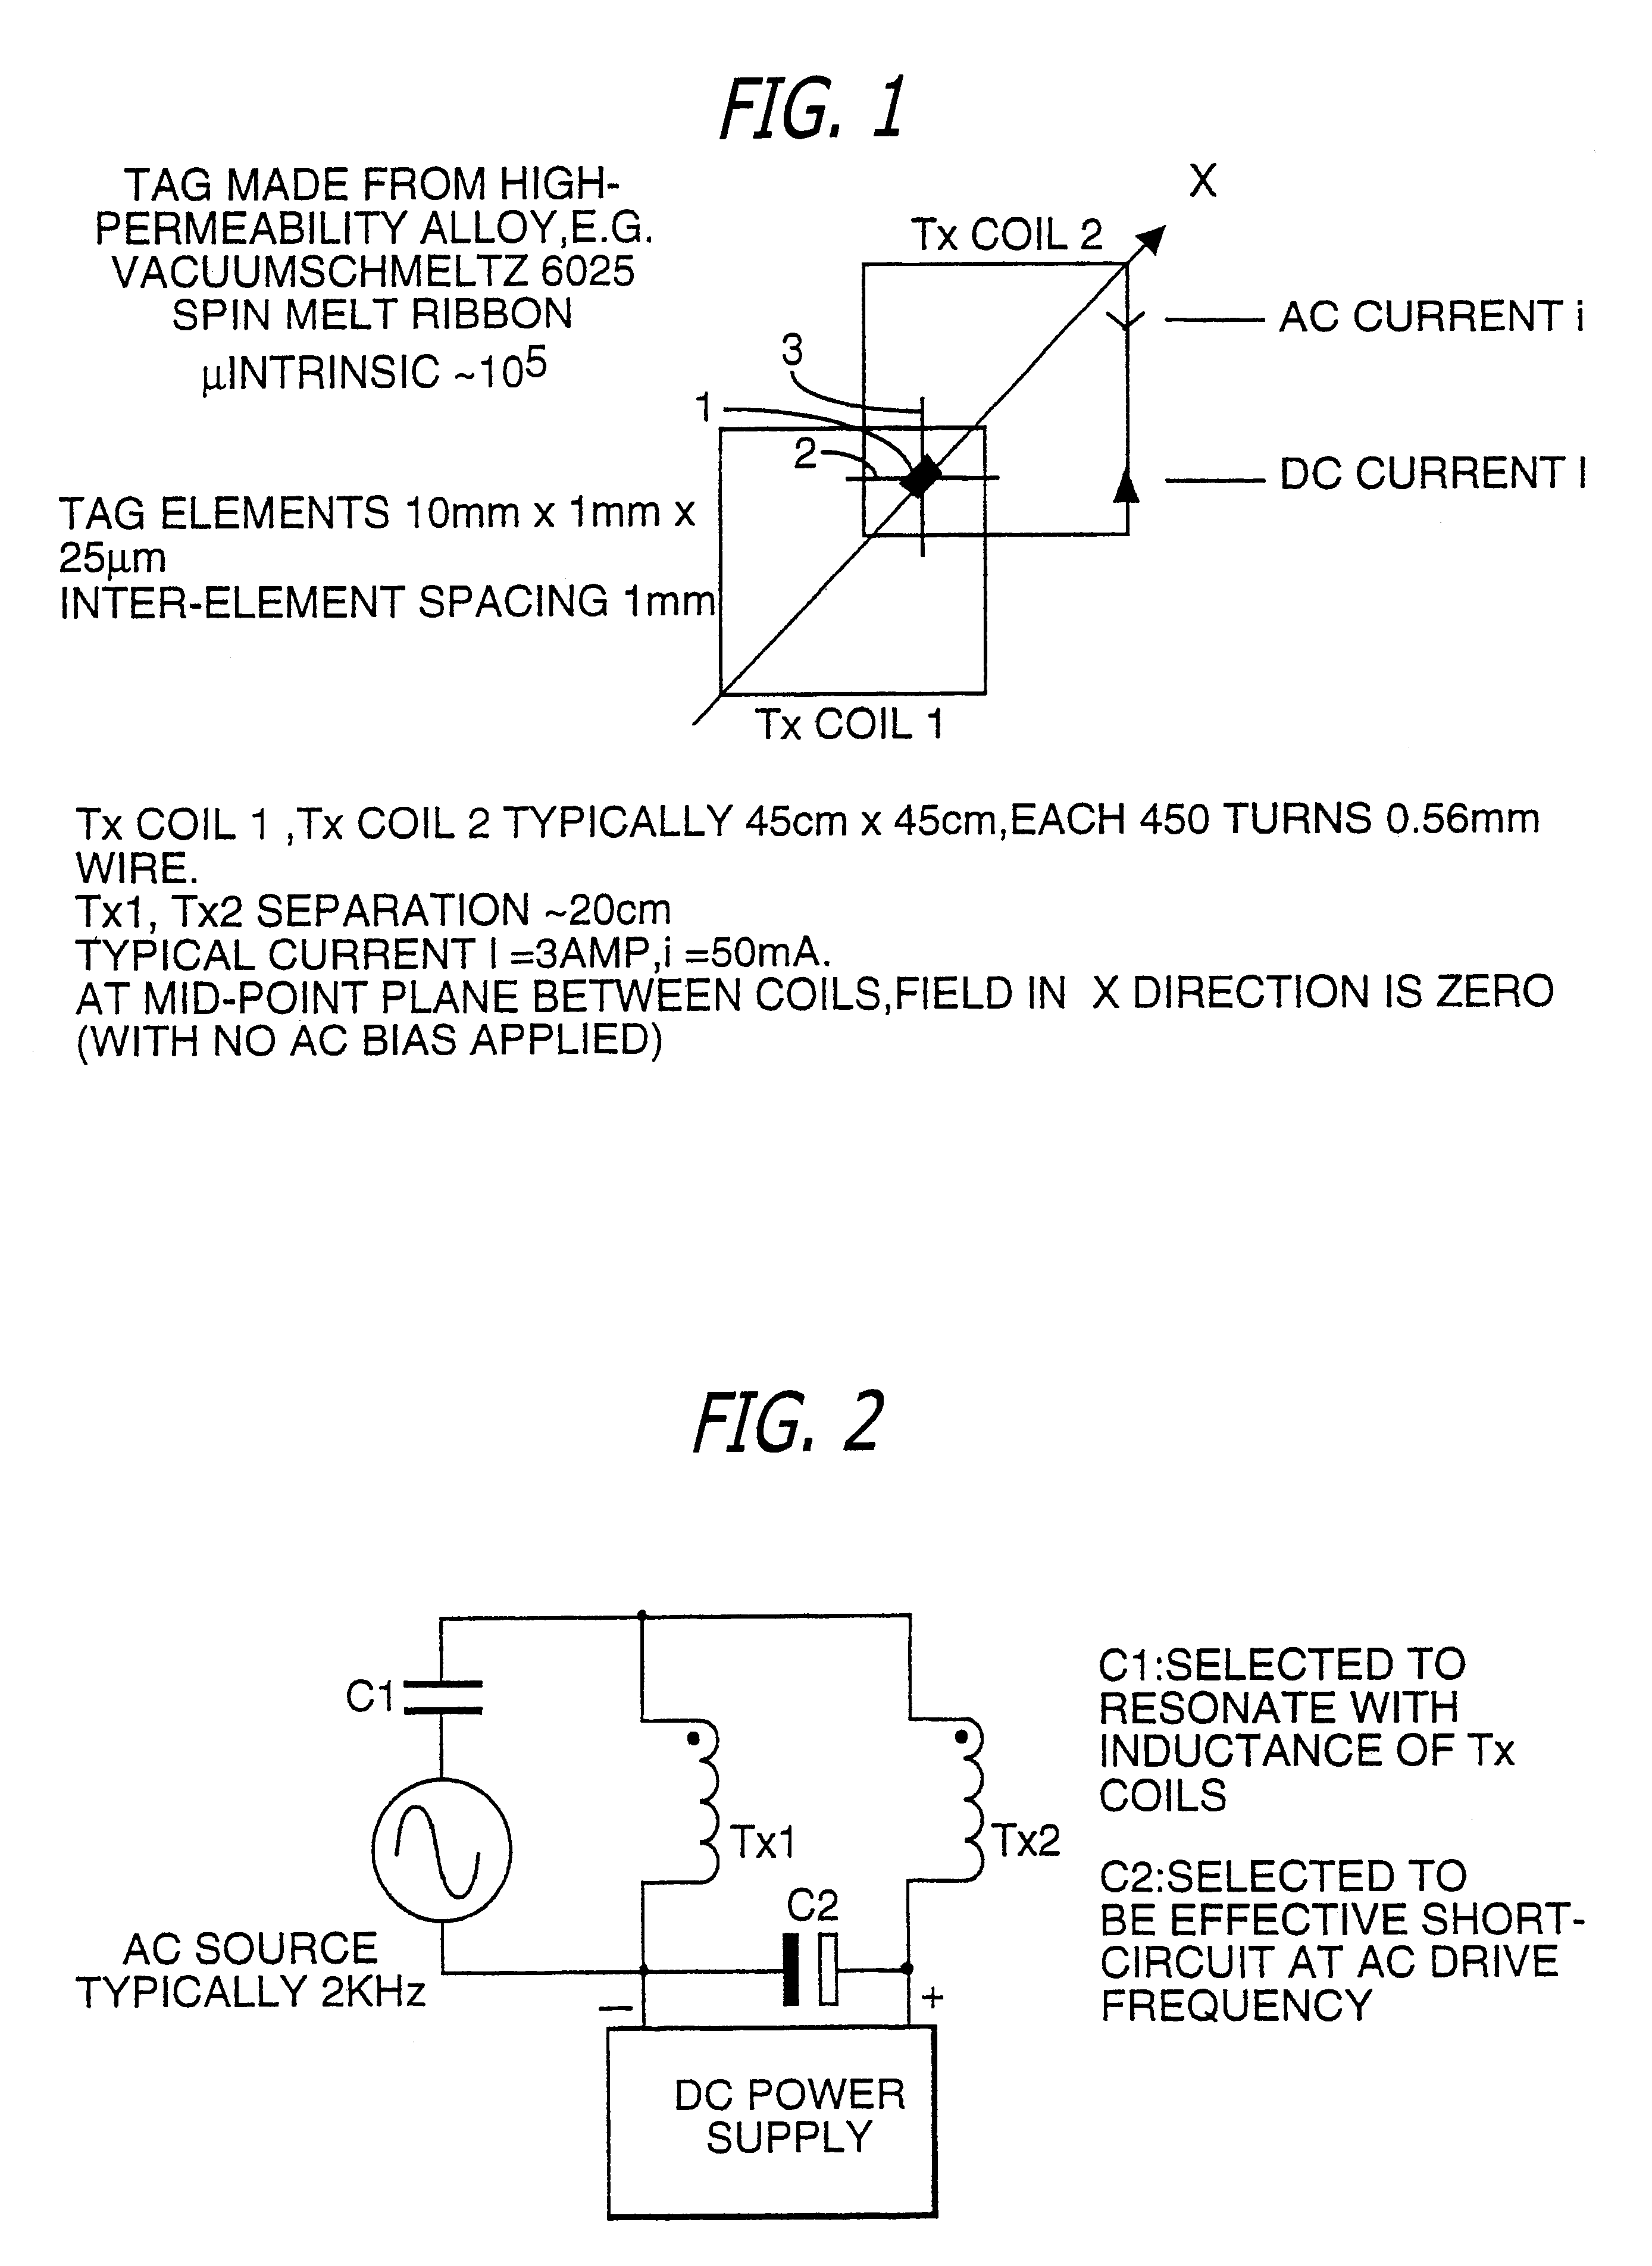 Apparatus for interrogating a magnetically coded tag